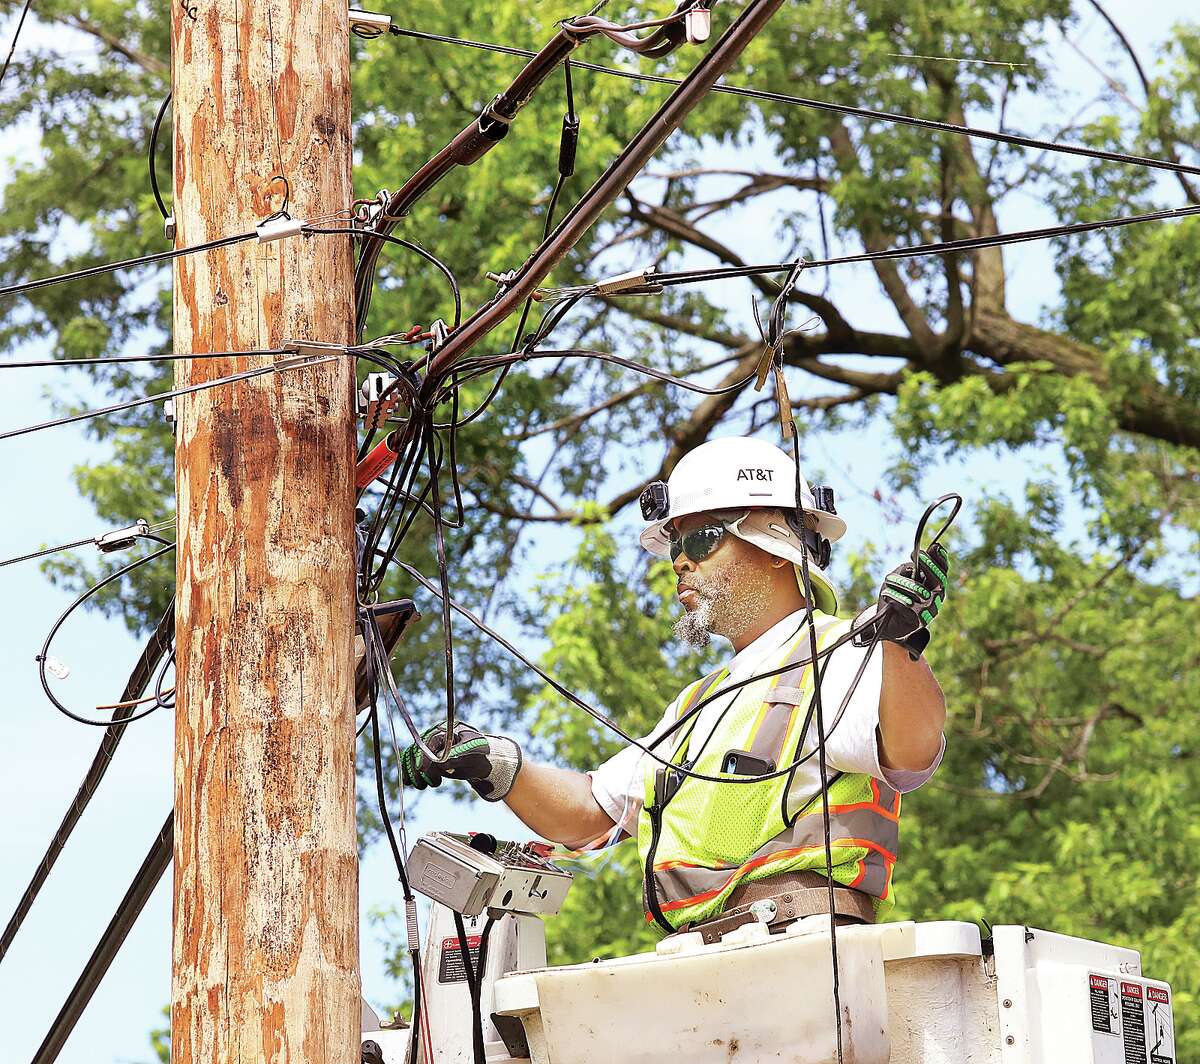 Ameren workers were not the only ones in action Friday morning. An AT&T lineman makes repairs in the 200 block of East 12th Street in Alton.